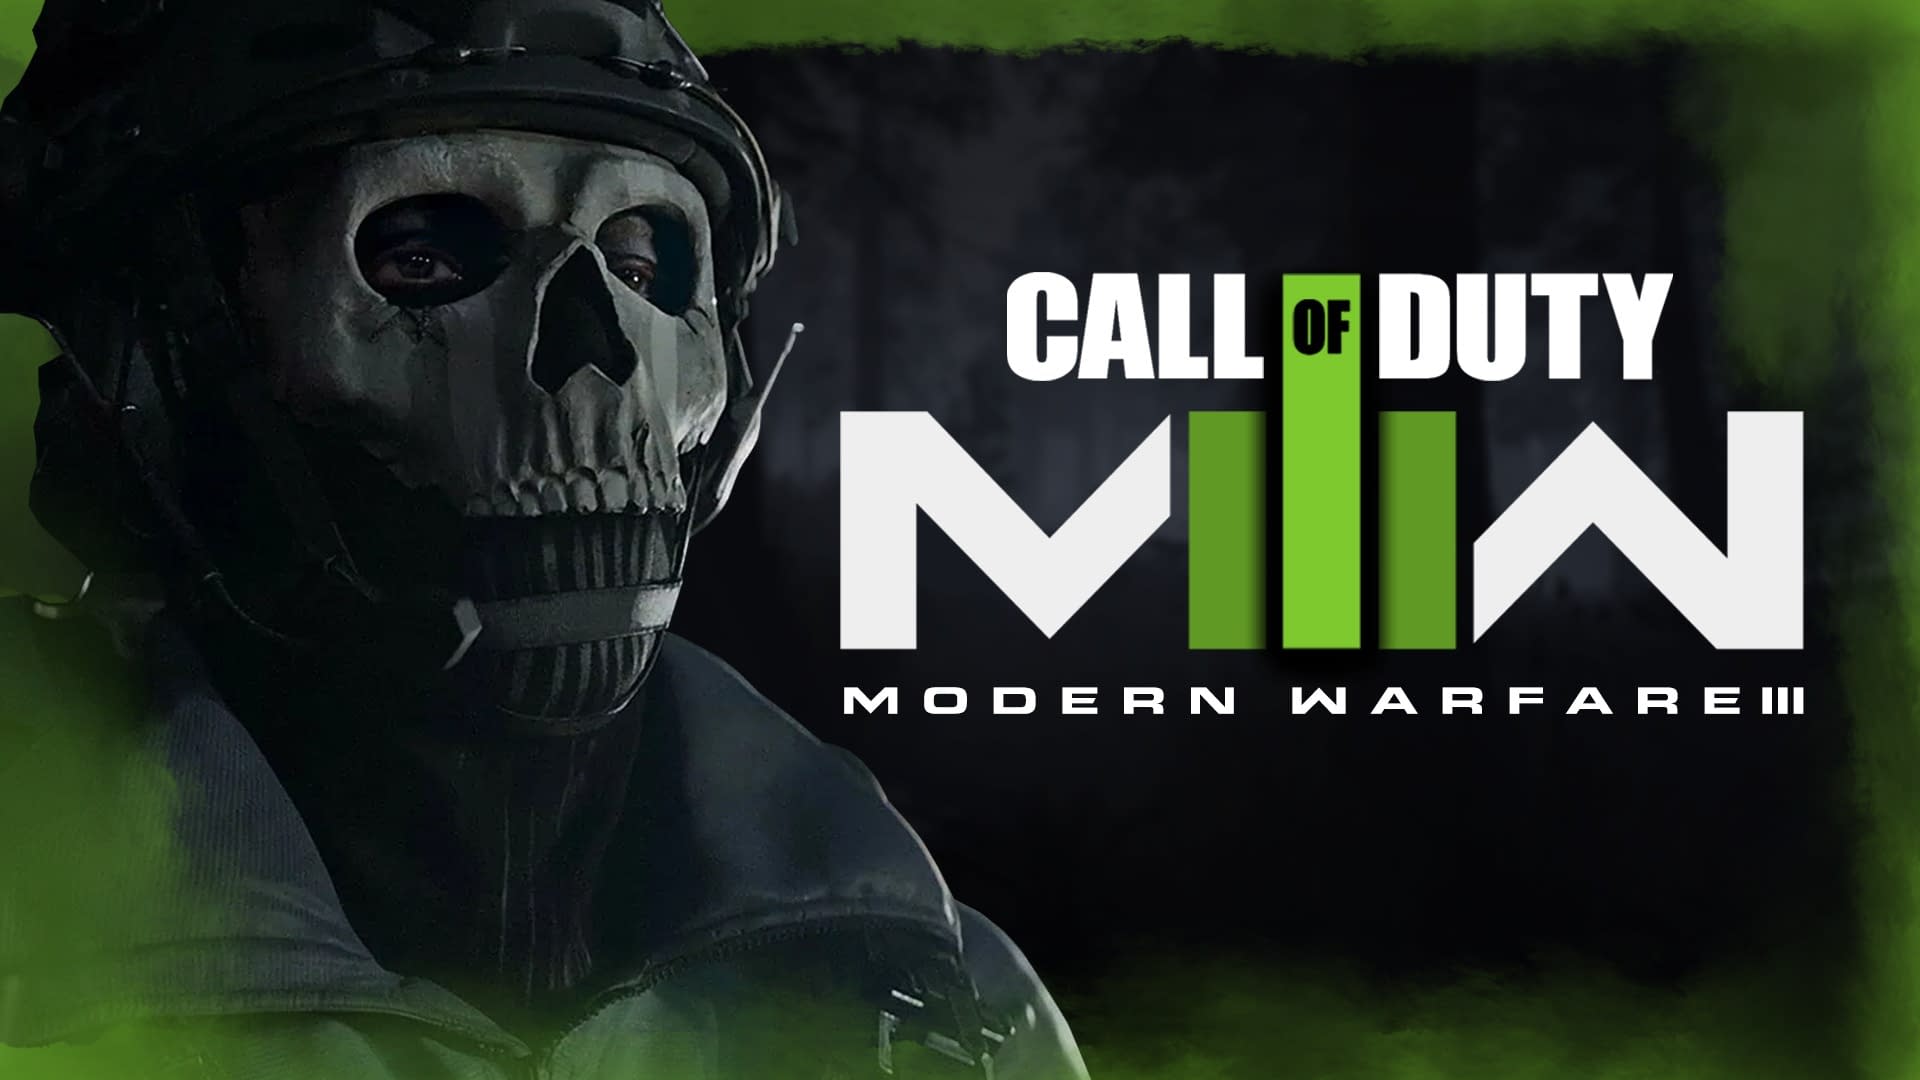 The name of the New Call of Duty game was noted: Modern Warfare 3